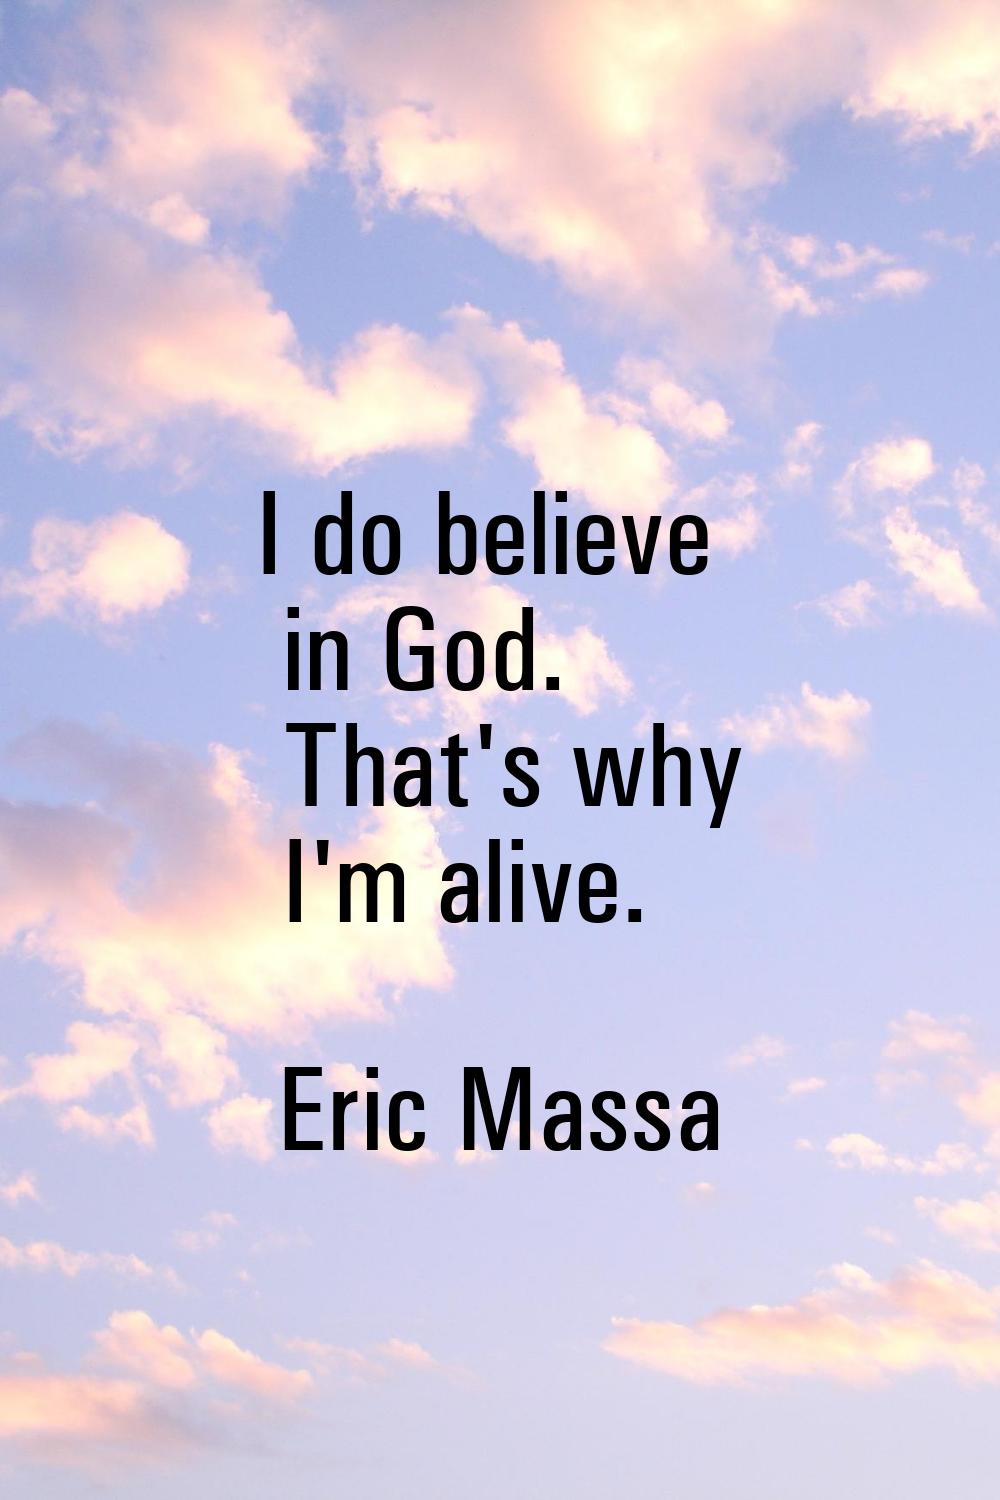 I do believe in God. That's why I'm alive.